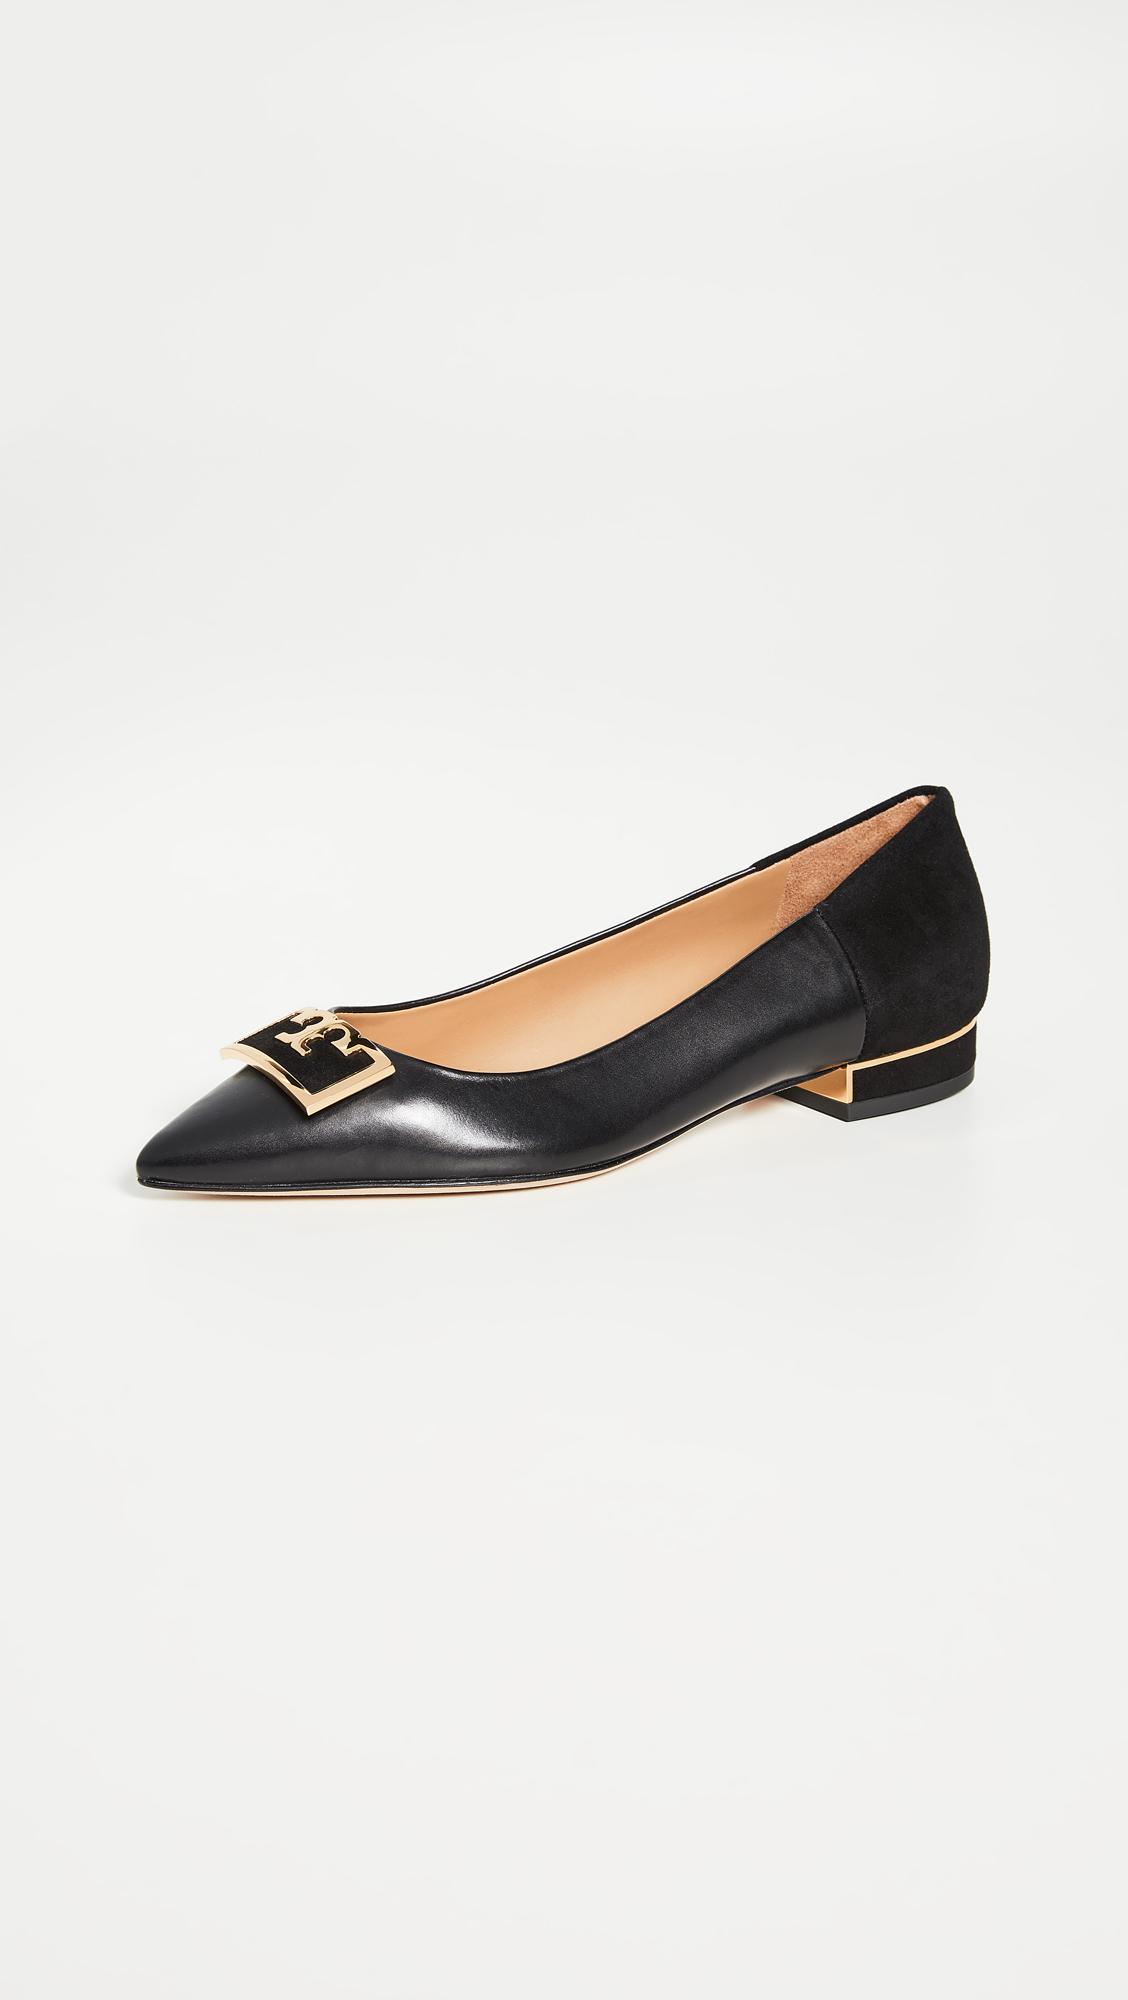 Tory Burch Gigi Pointed Flats in |